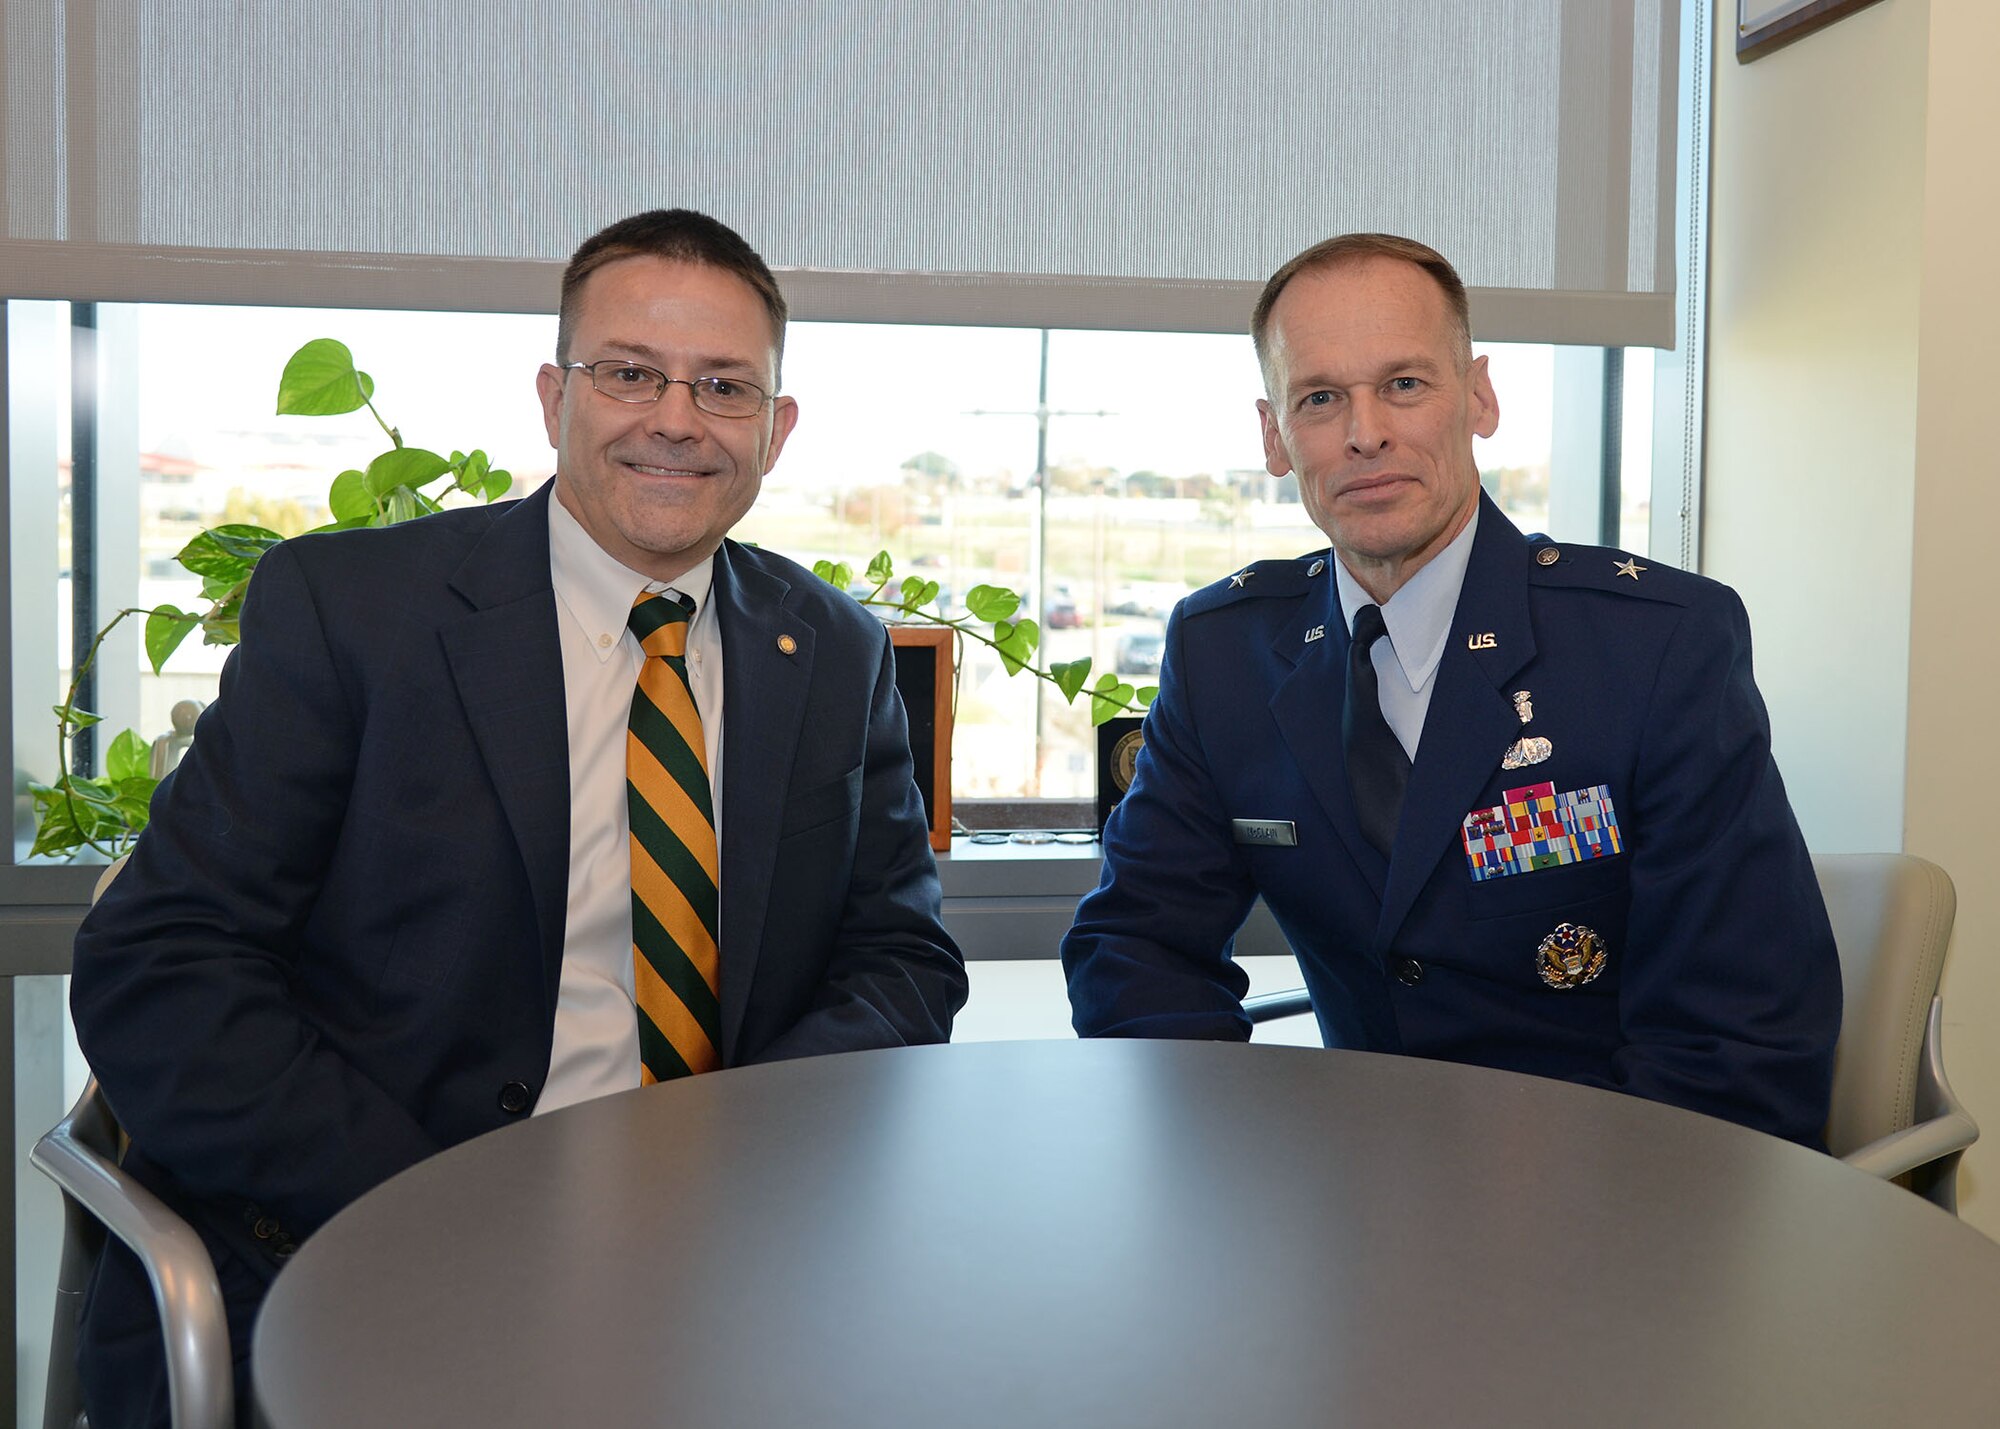 Brig. Gen. James McClain, Air Force Medical Support Agency commander, meets with Dr. W. Scott Jones, San Antonio Uniformed Services Health Education Consortium dean, during a visit to the San Antonio Military Medical Center, Joint Base San Antonio-Fort Sam Houson, Texas, Dec. 8, 2014. McClain and Jones met briefly to discuss the evolving opportunities of integrated allied health care. McClain served as keynote speaker during the SAUSHEC Winter Commencement ceremony, and visited the 959th Medical Group Biomedical Science Corps areas at SAMMC and later 59th Medical Wing BSC areas at the Wilford Hall Ambulatory Surgical Center on JBSA-Lackland. (U.S. Air Force photo/Staff Sgt. Christopher Carwile)